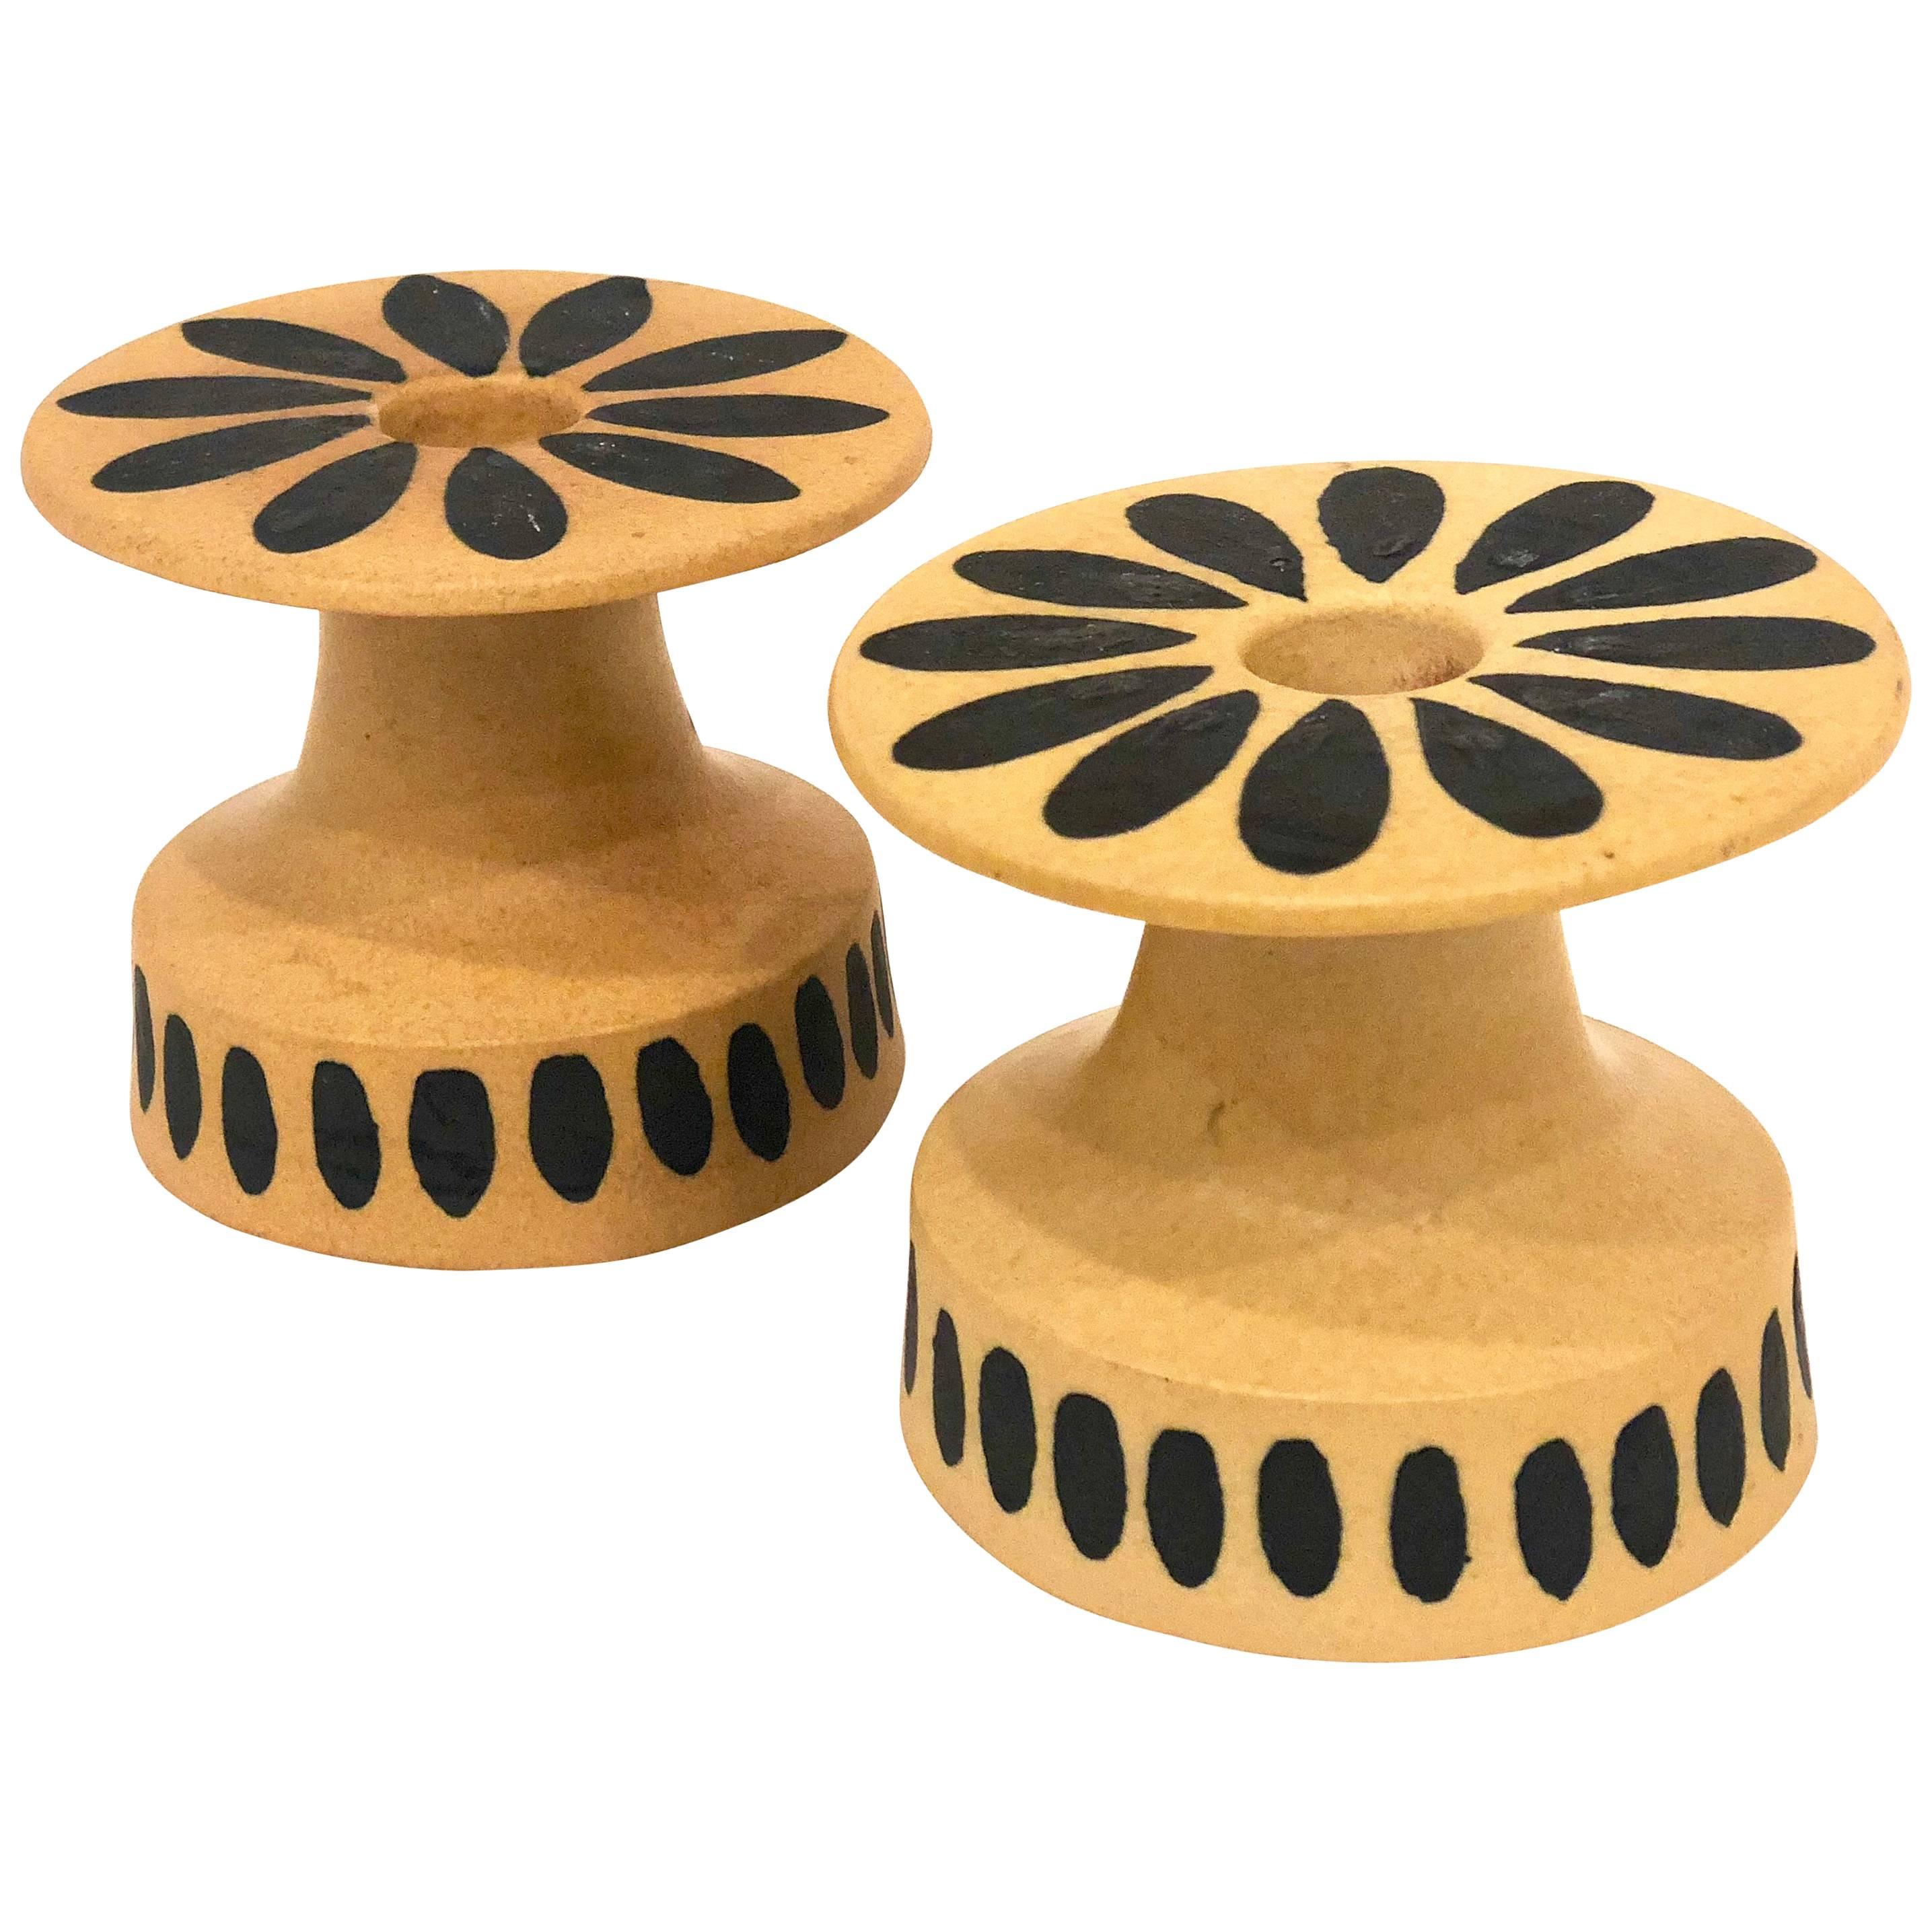 Pair of Midcentury Ceramic Candlestick Holders by Bennington Potters